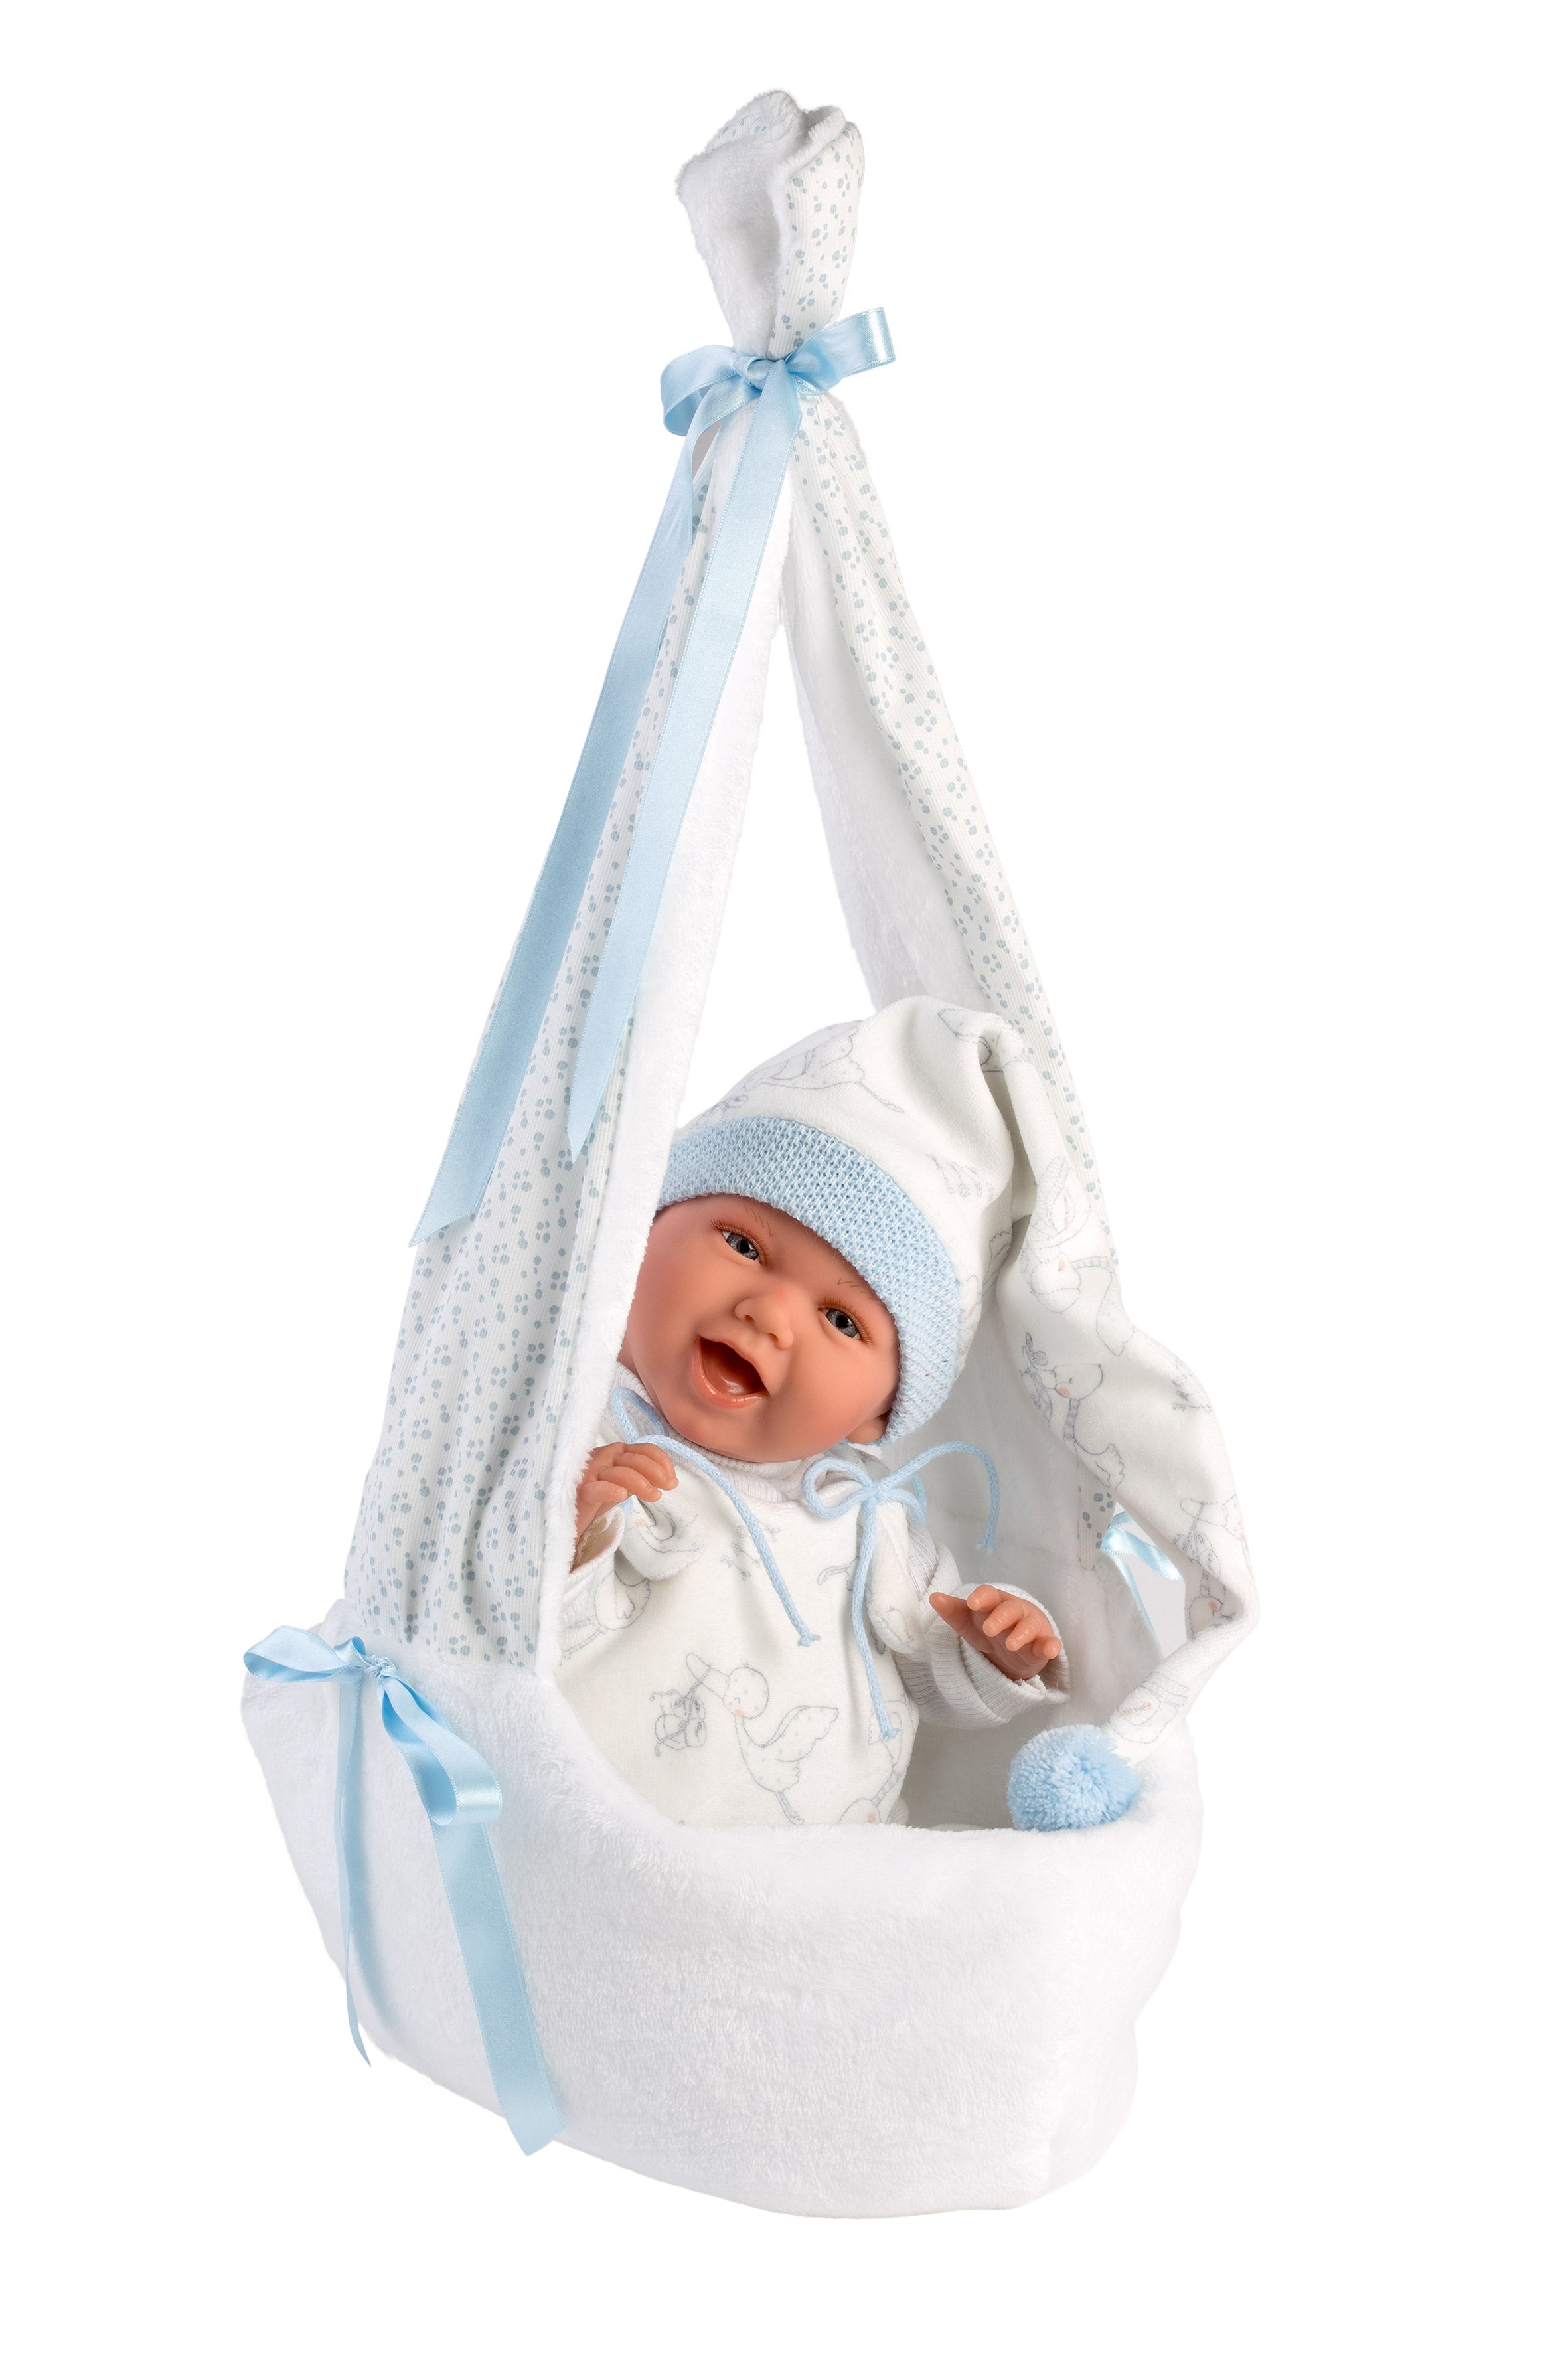 Llorens 16.5" Articulated New Born Drake With Carrycot Dolls